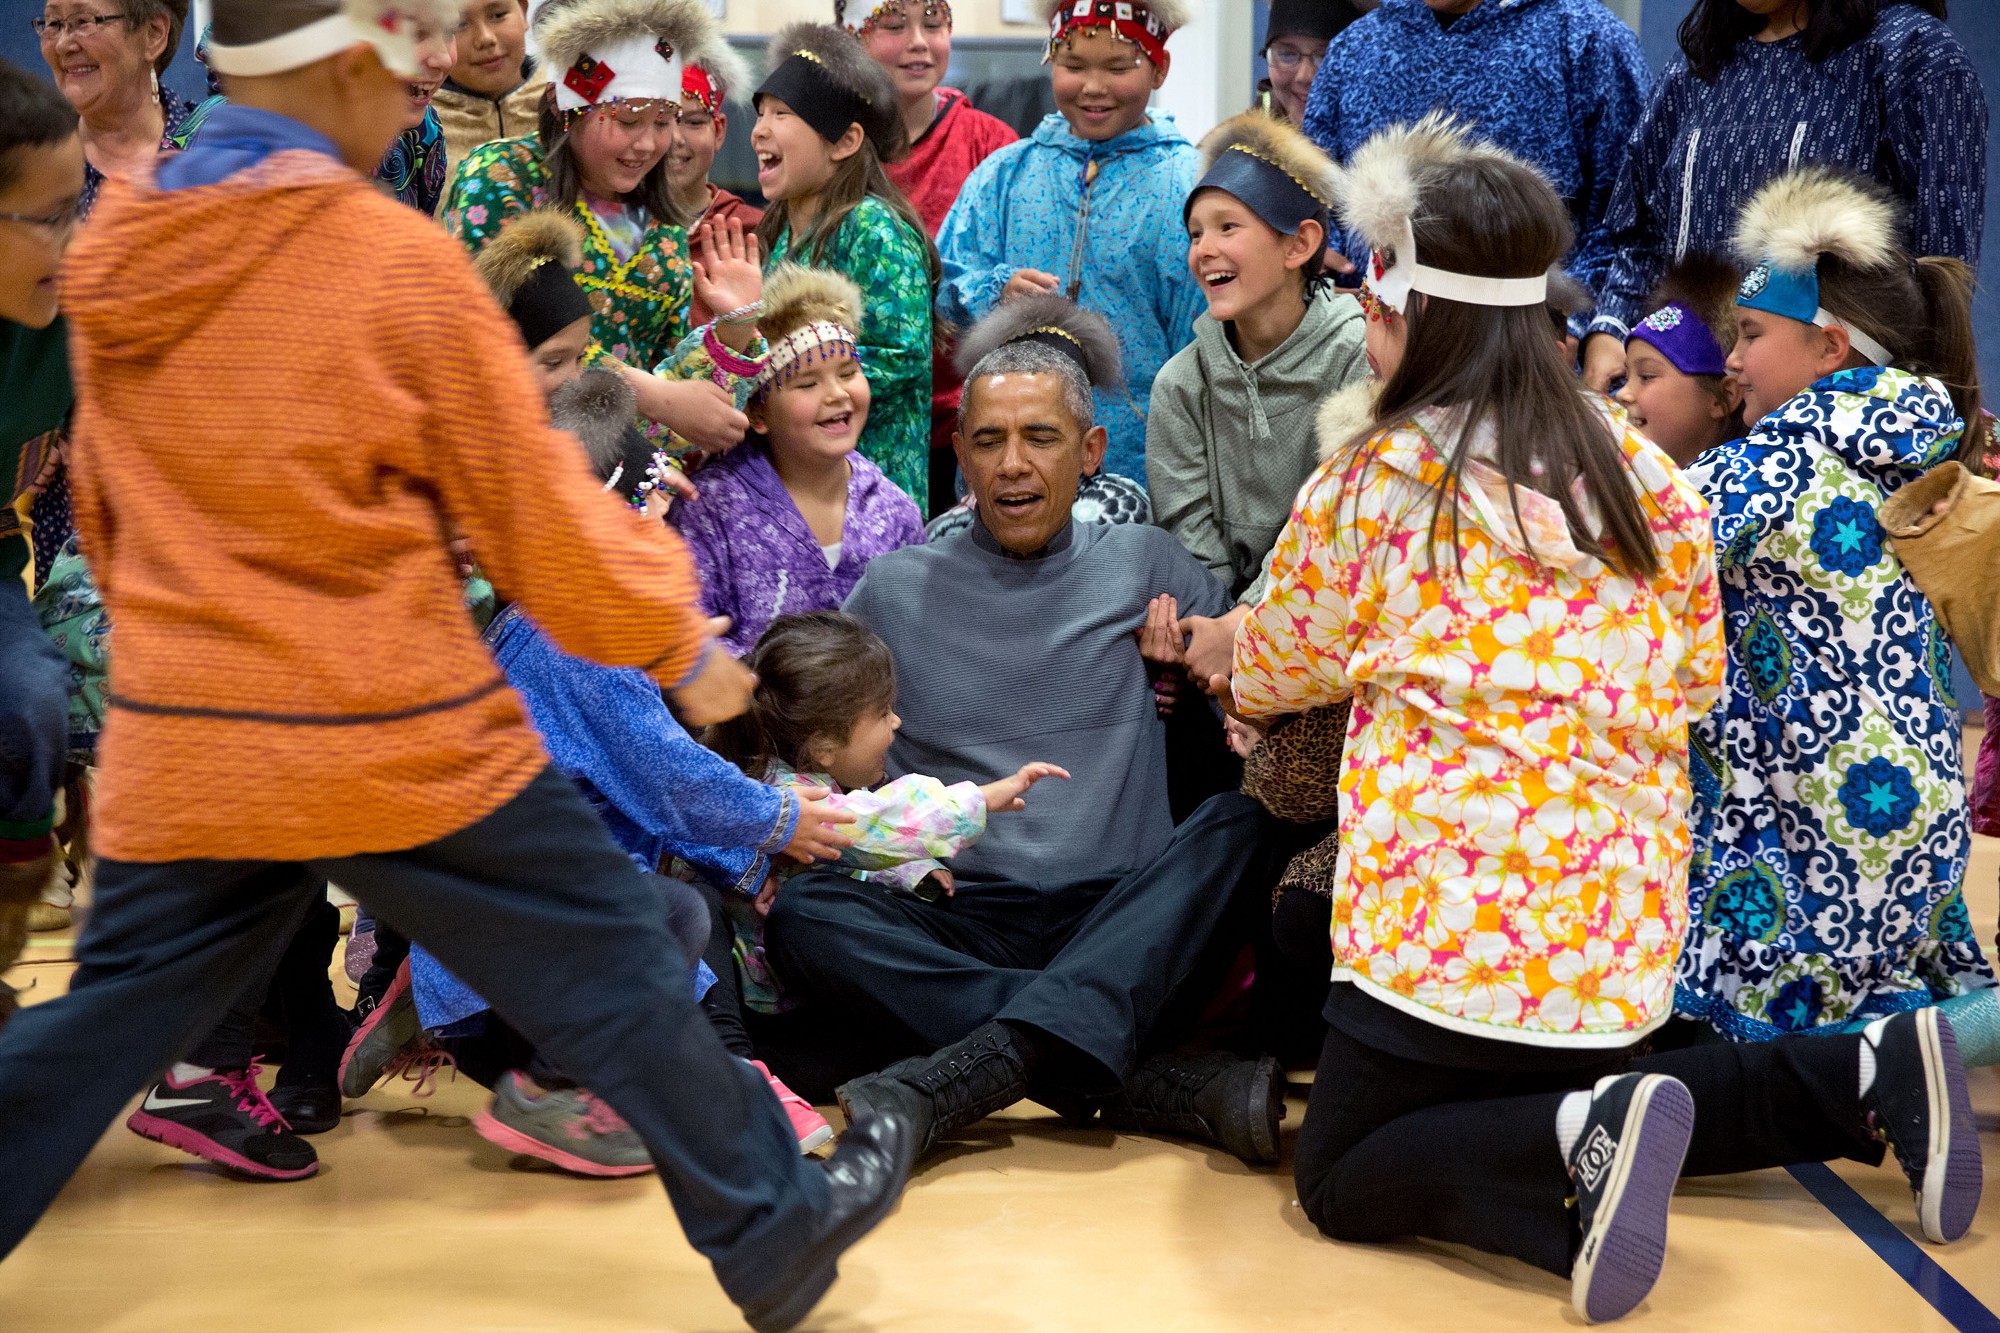 Getting help to his feet after a group photo with the performers. (Official White House Photo by Pete Souza)